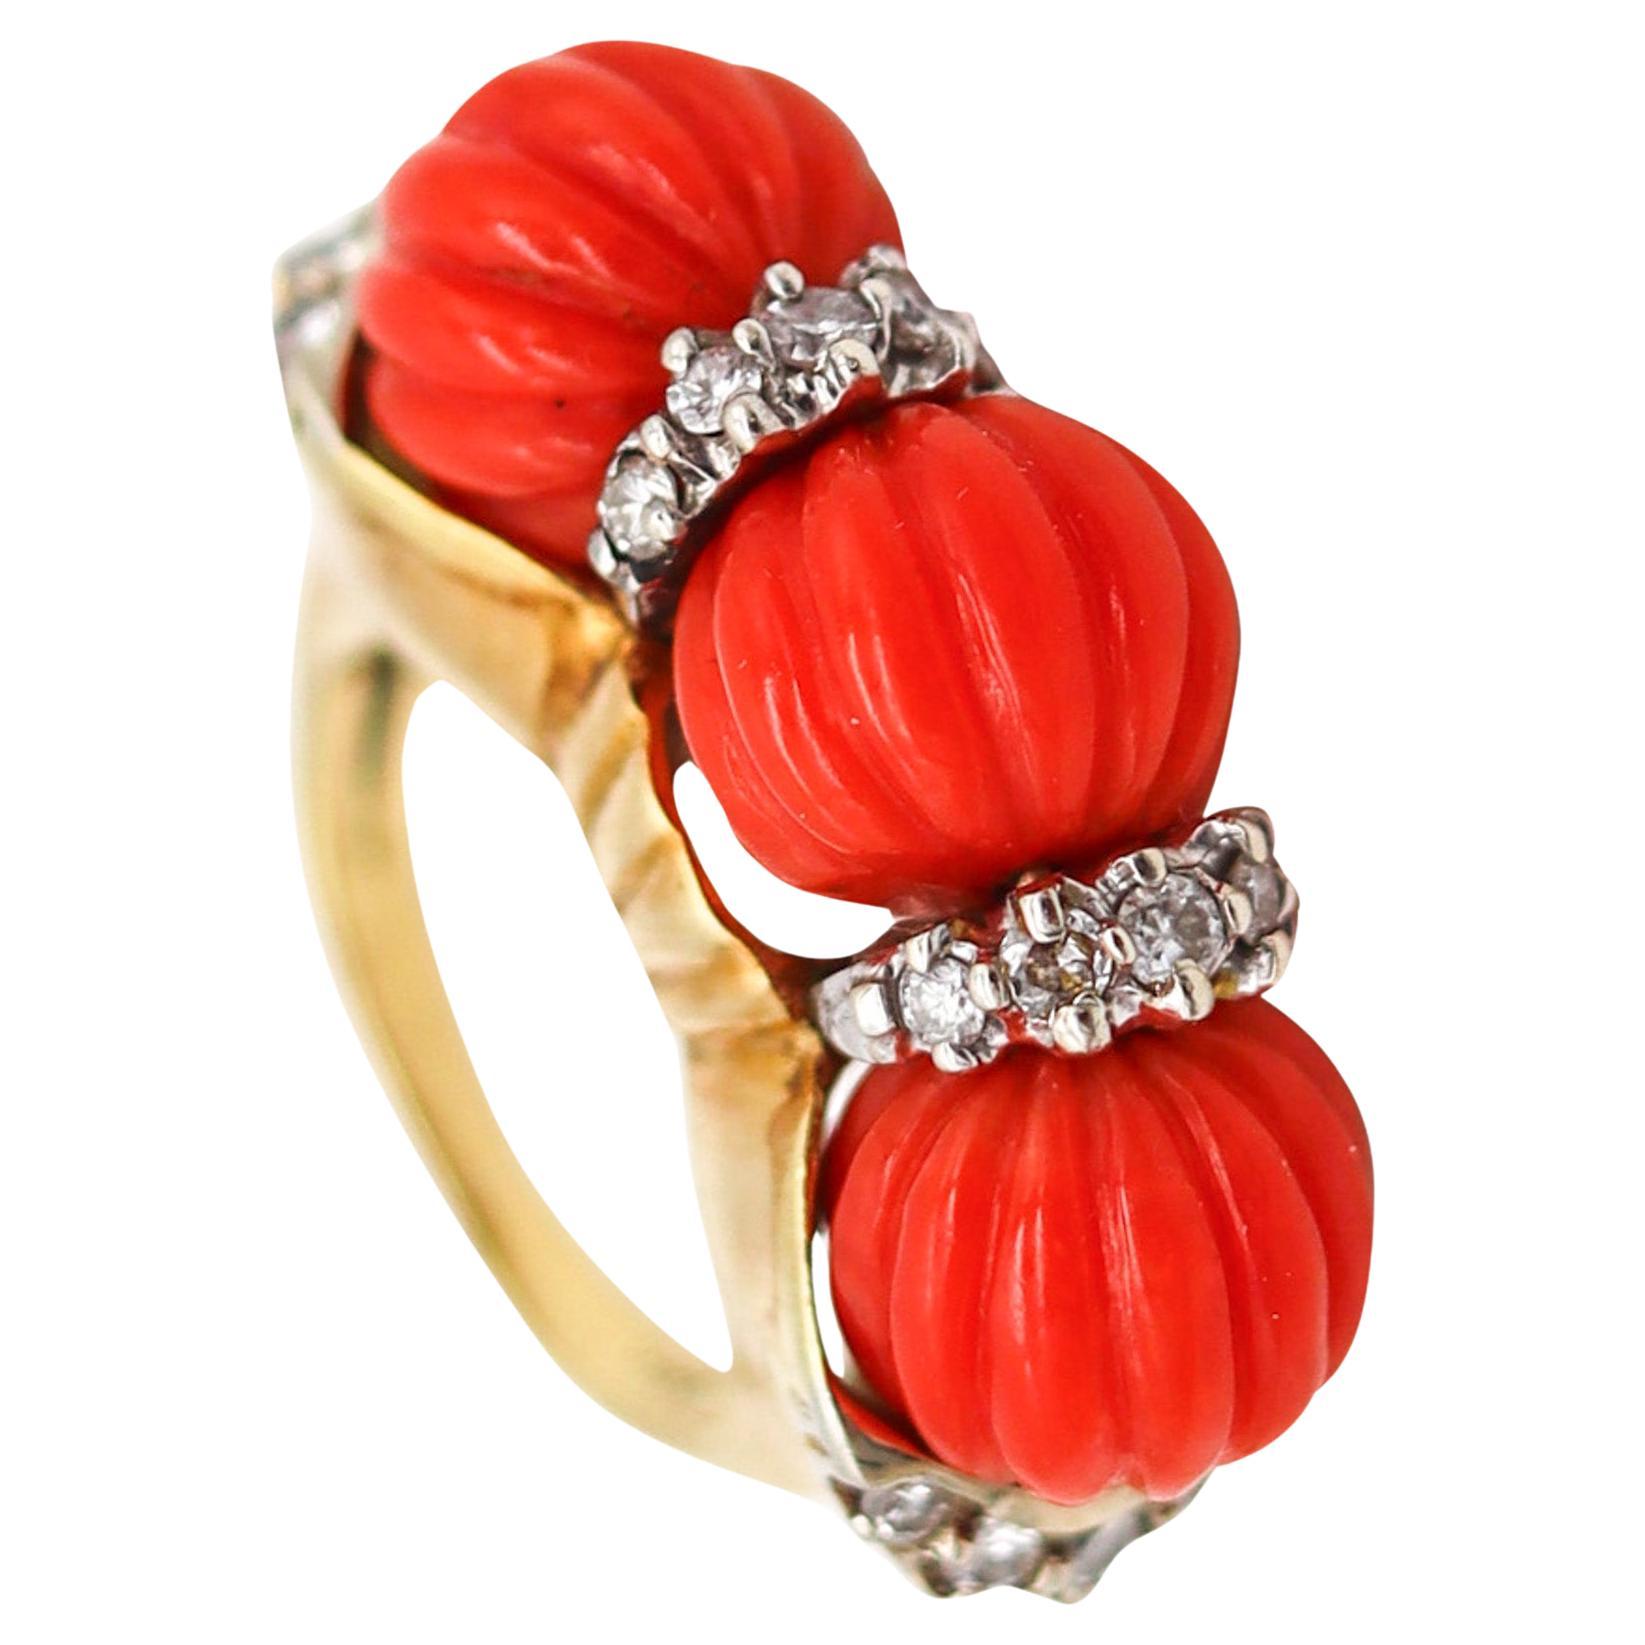 Francesco Passaretta 1970 Fluted Sardinian Coral Ring In 18Kt Gold With Diamonds For Sale